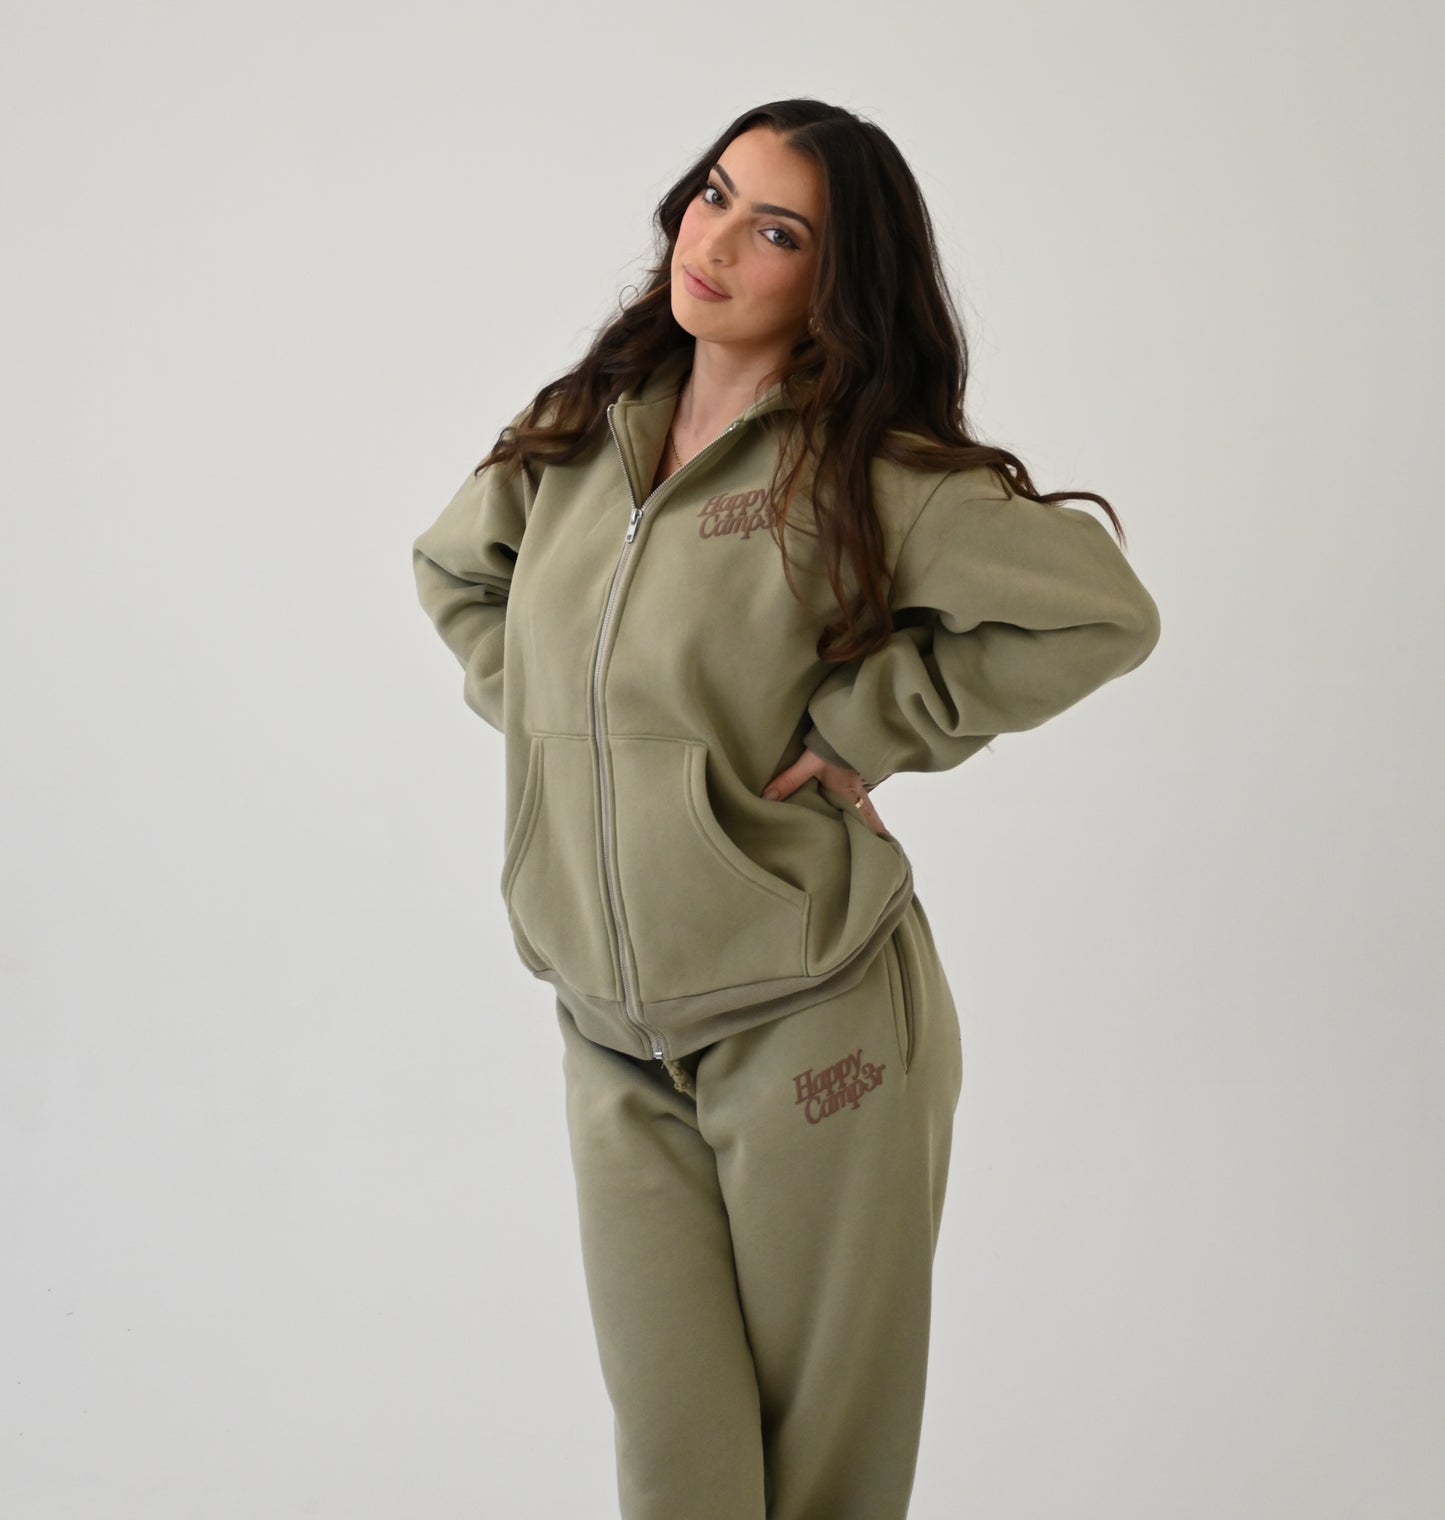 Disrupt Anxiety with Gratitude Sweatpants - Dusty Olive